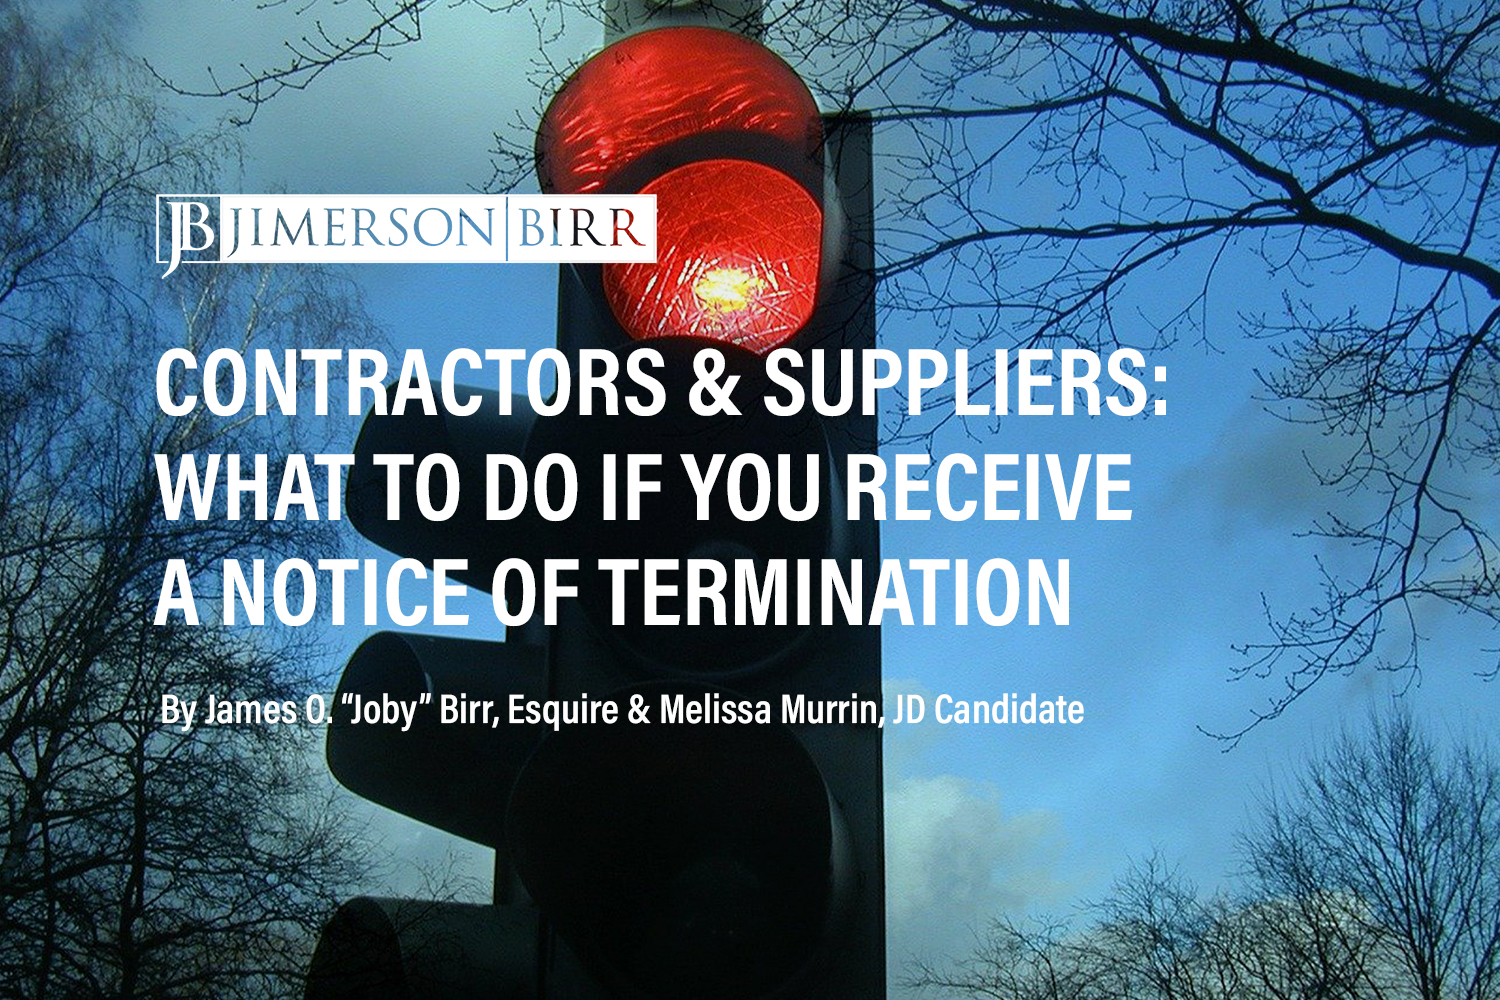 Contractors and Suppliers: What to Do if You Receive a Notice of Termination